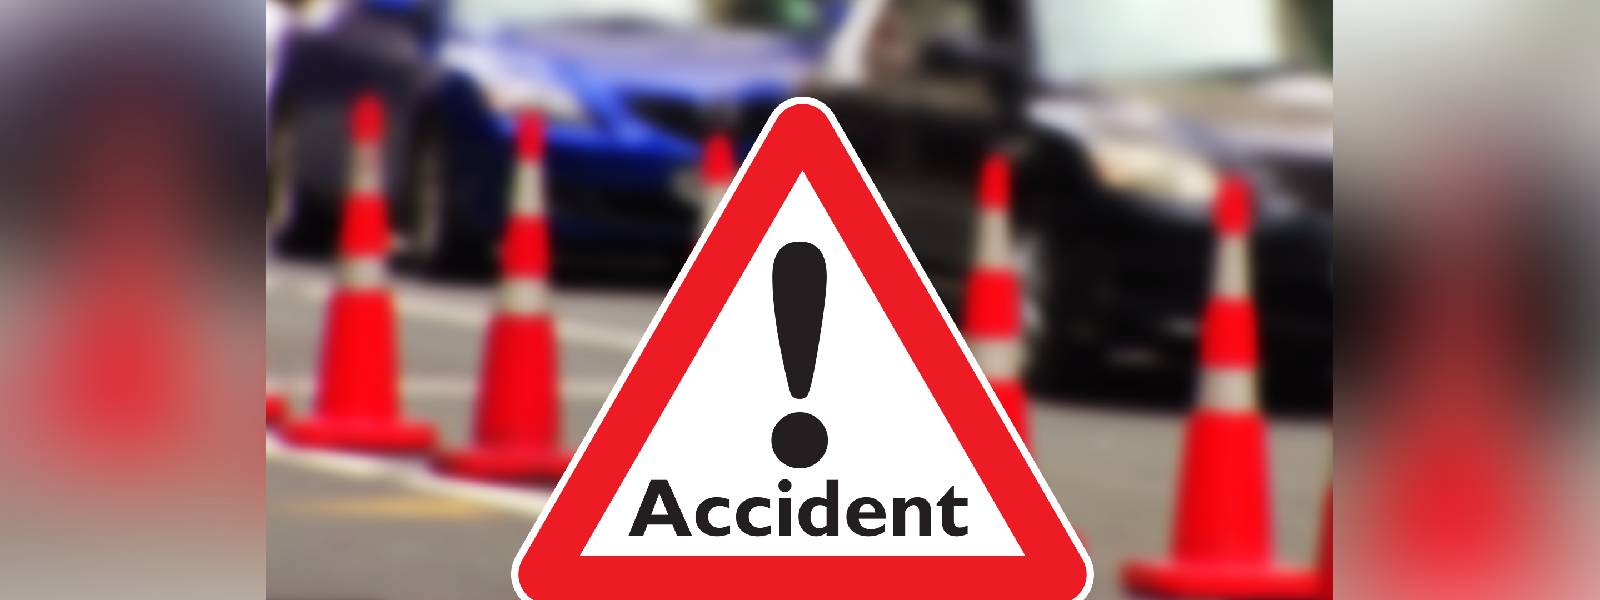 5 killed, 11 injured due to accidents yesterday